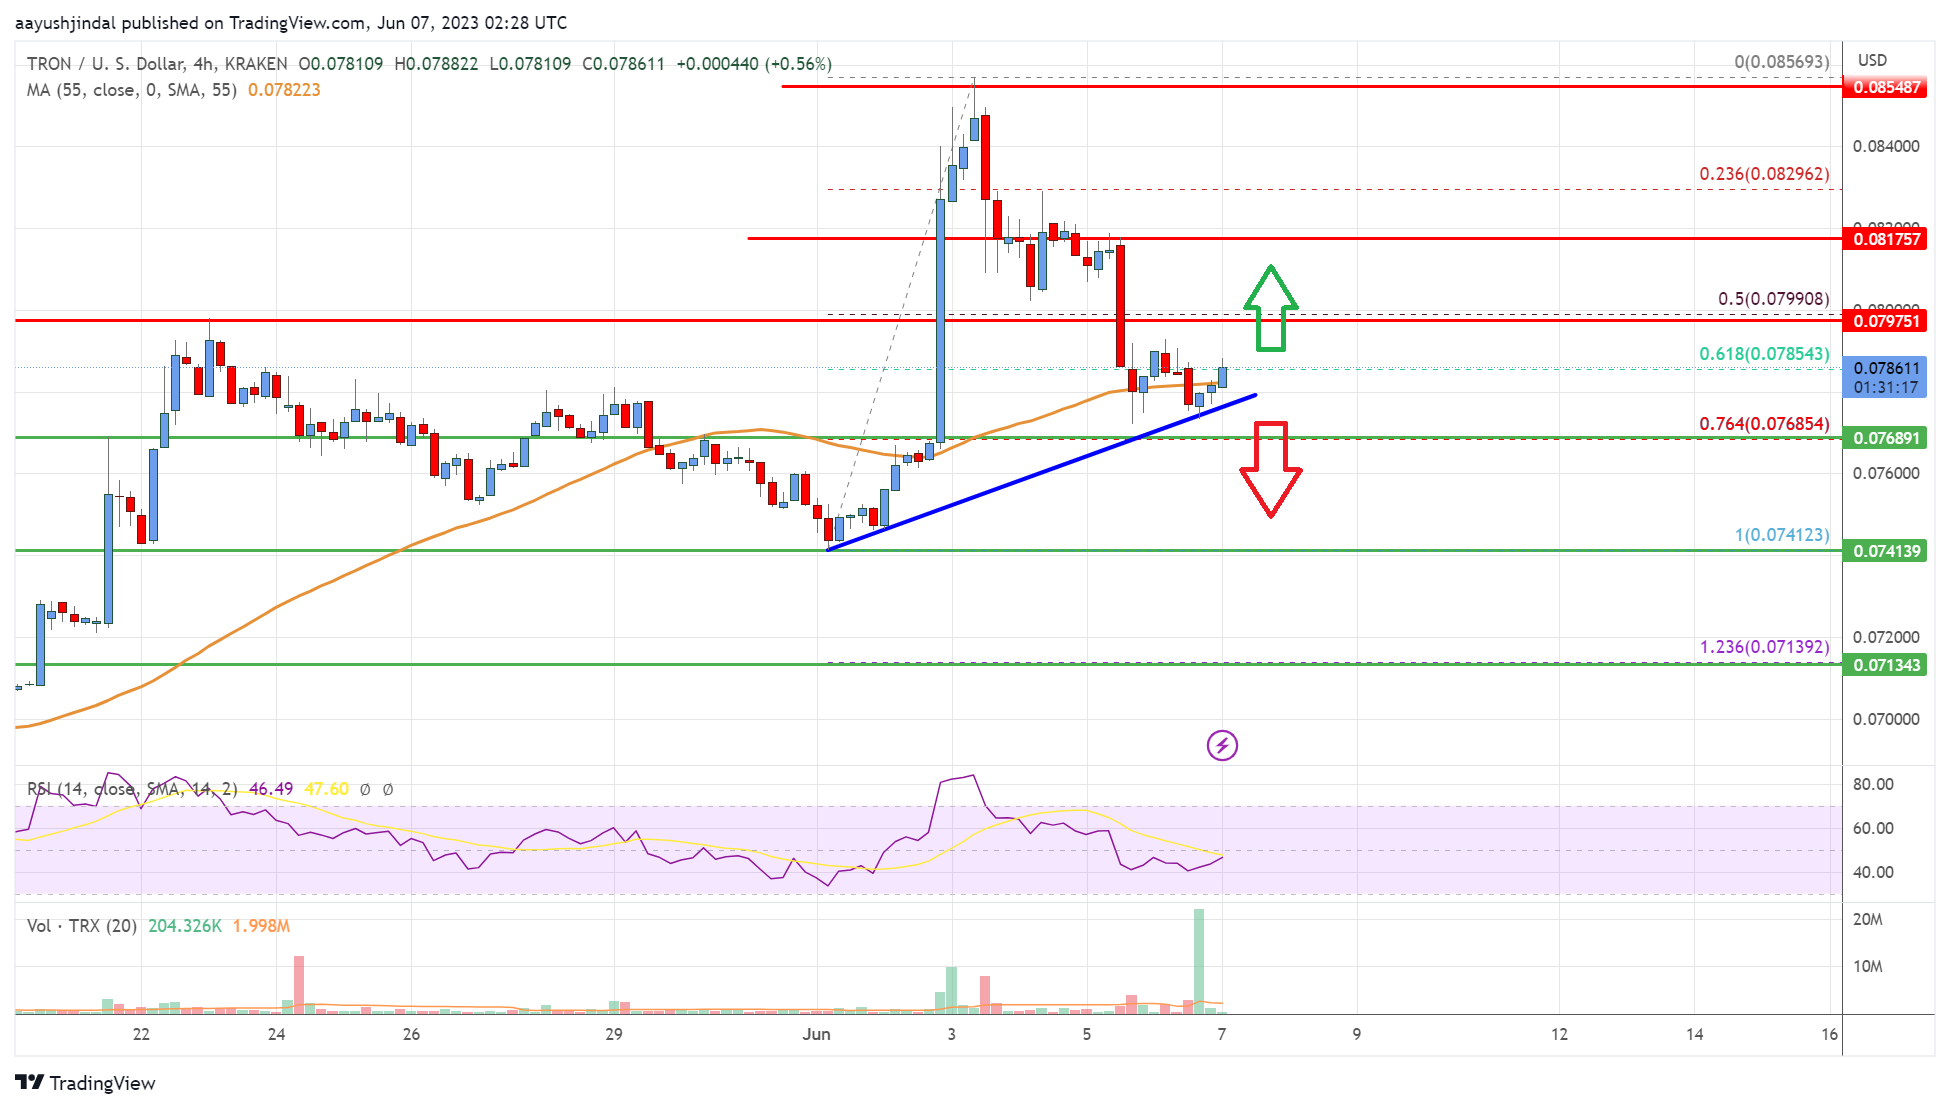 Tron (TRX) Price Analysis: Key Uptrend Support Intact